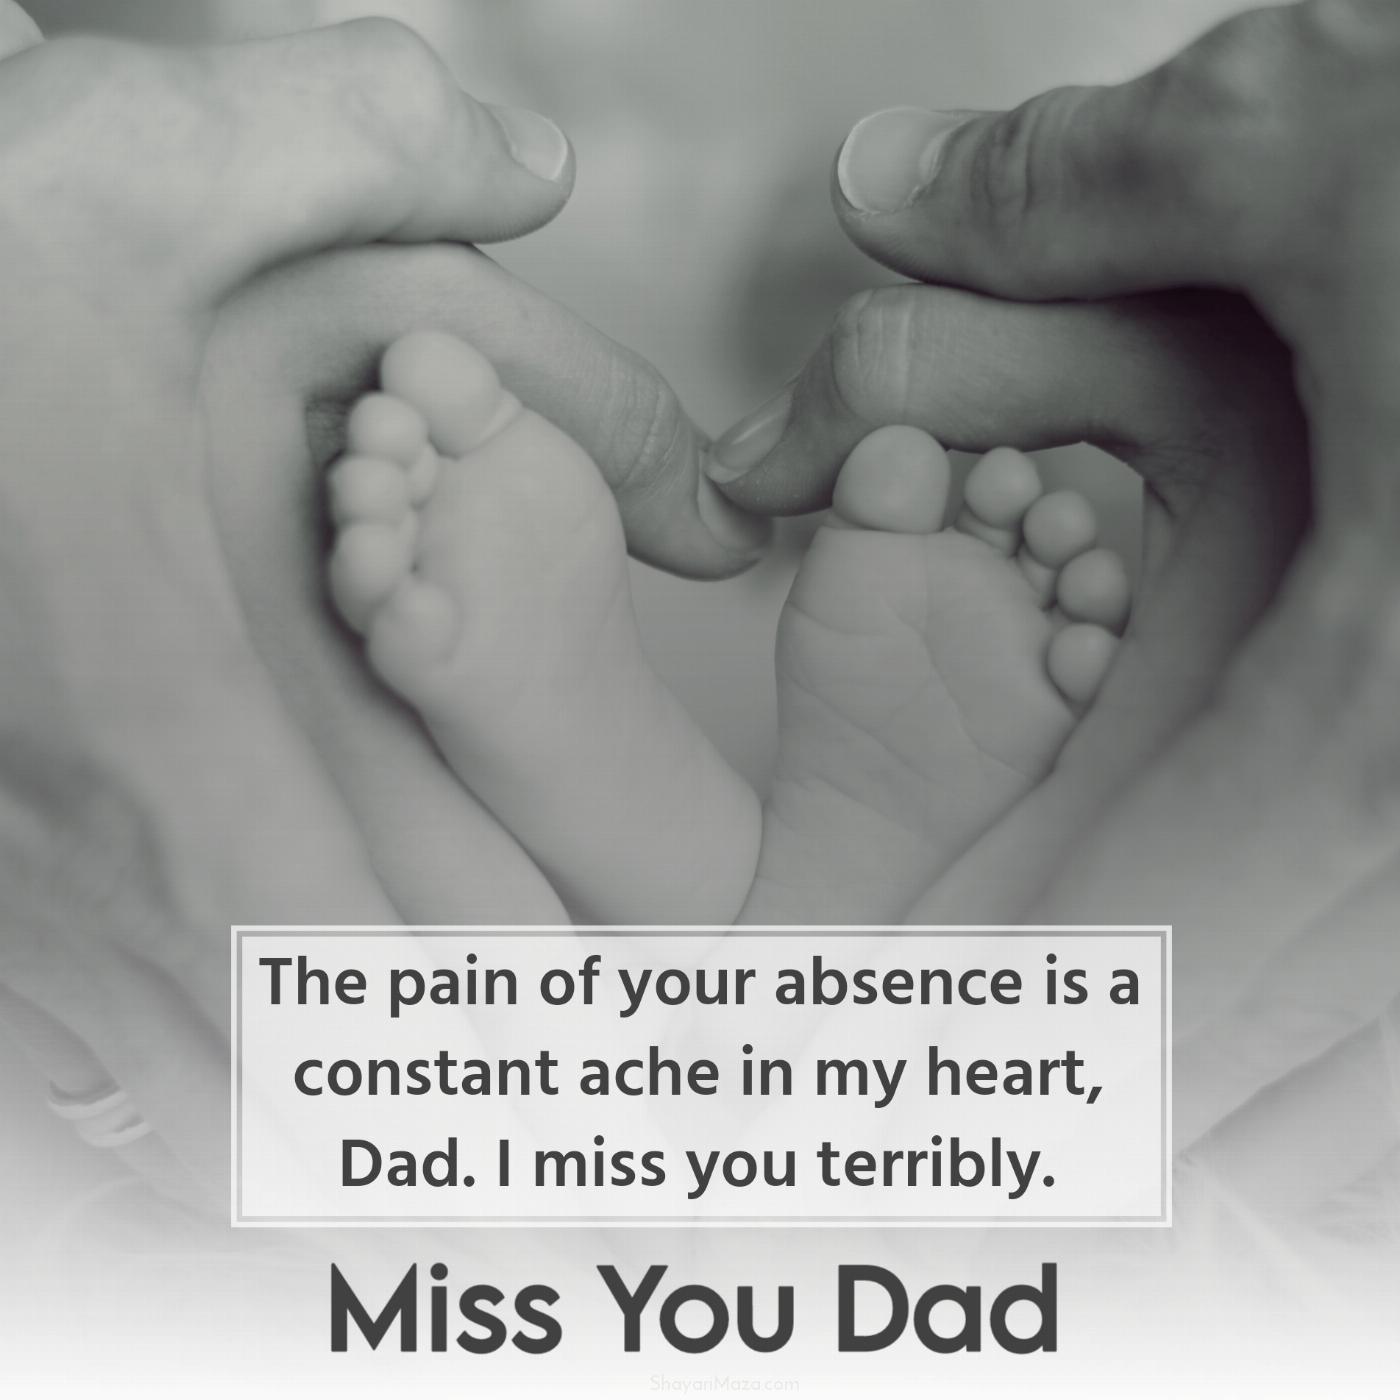 The pain of your absence is a constant ache in my heart Dad